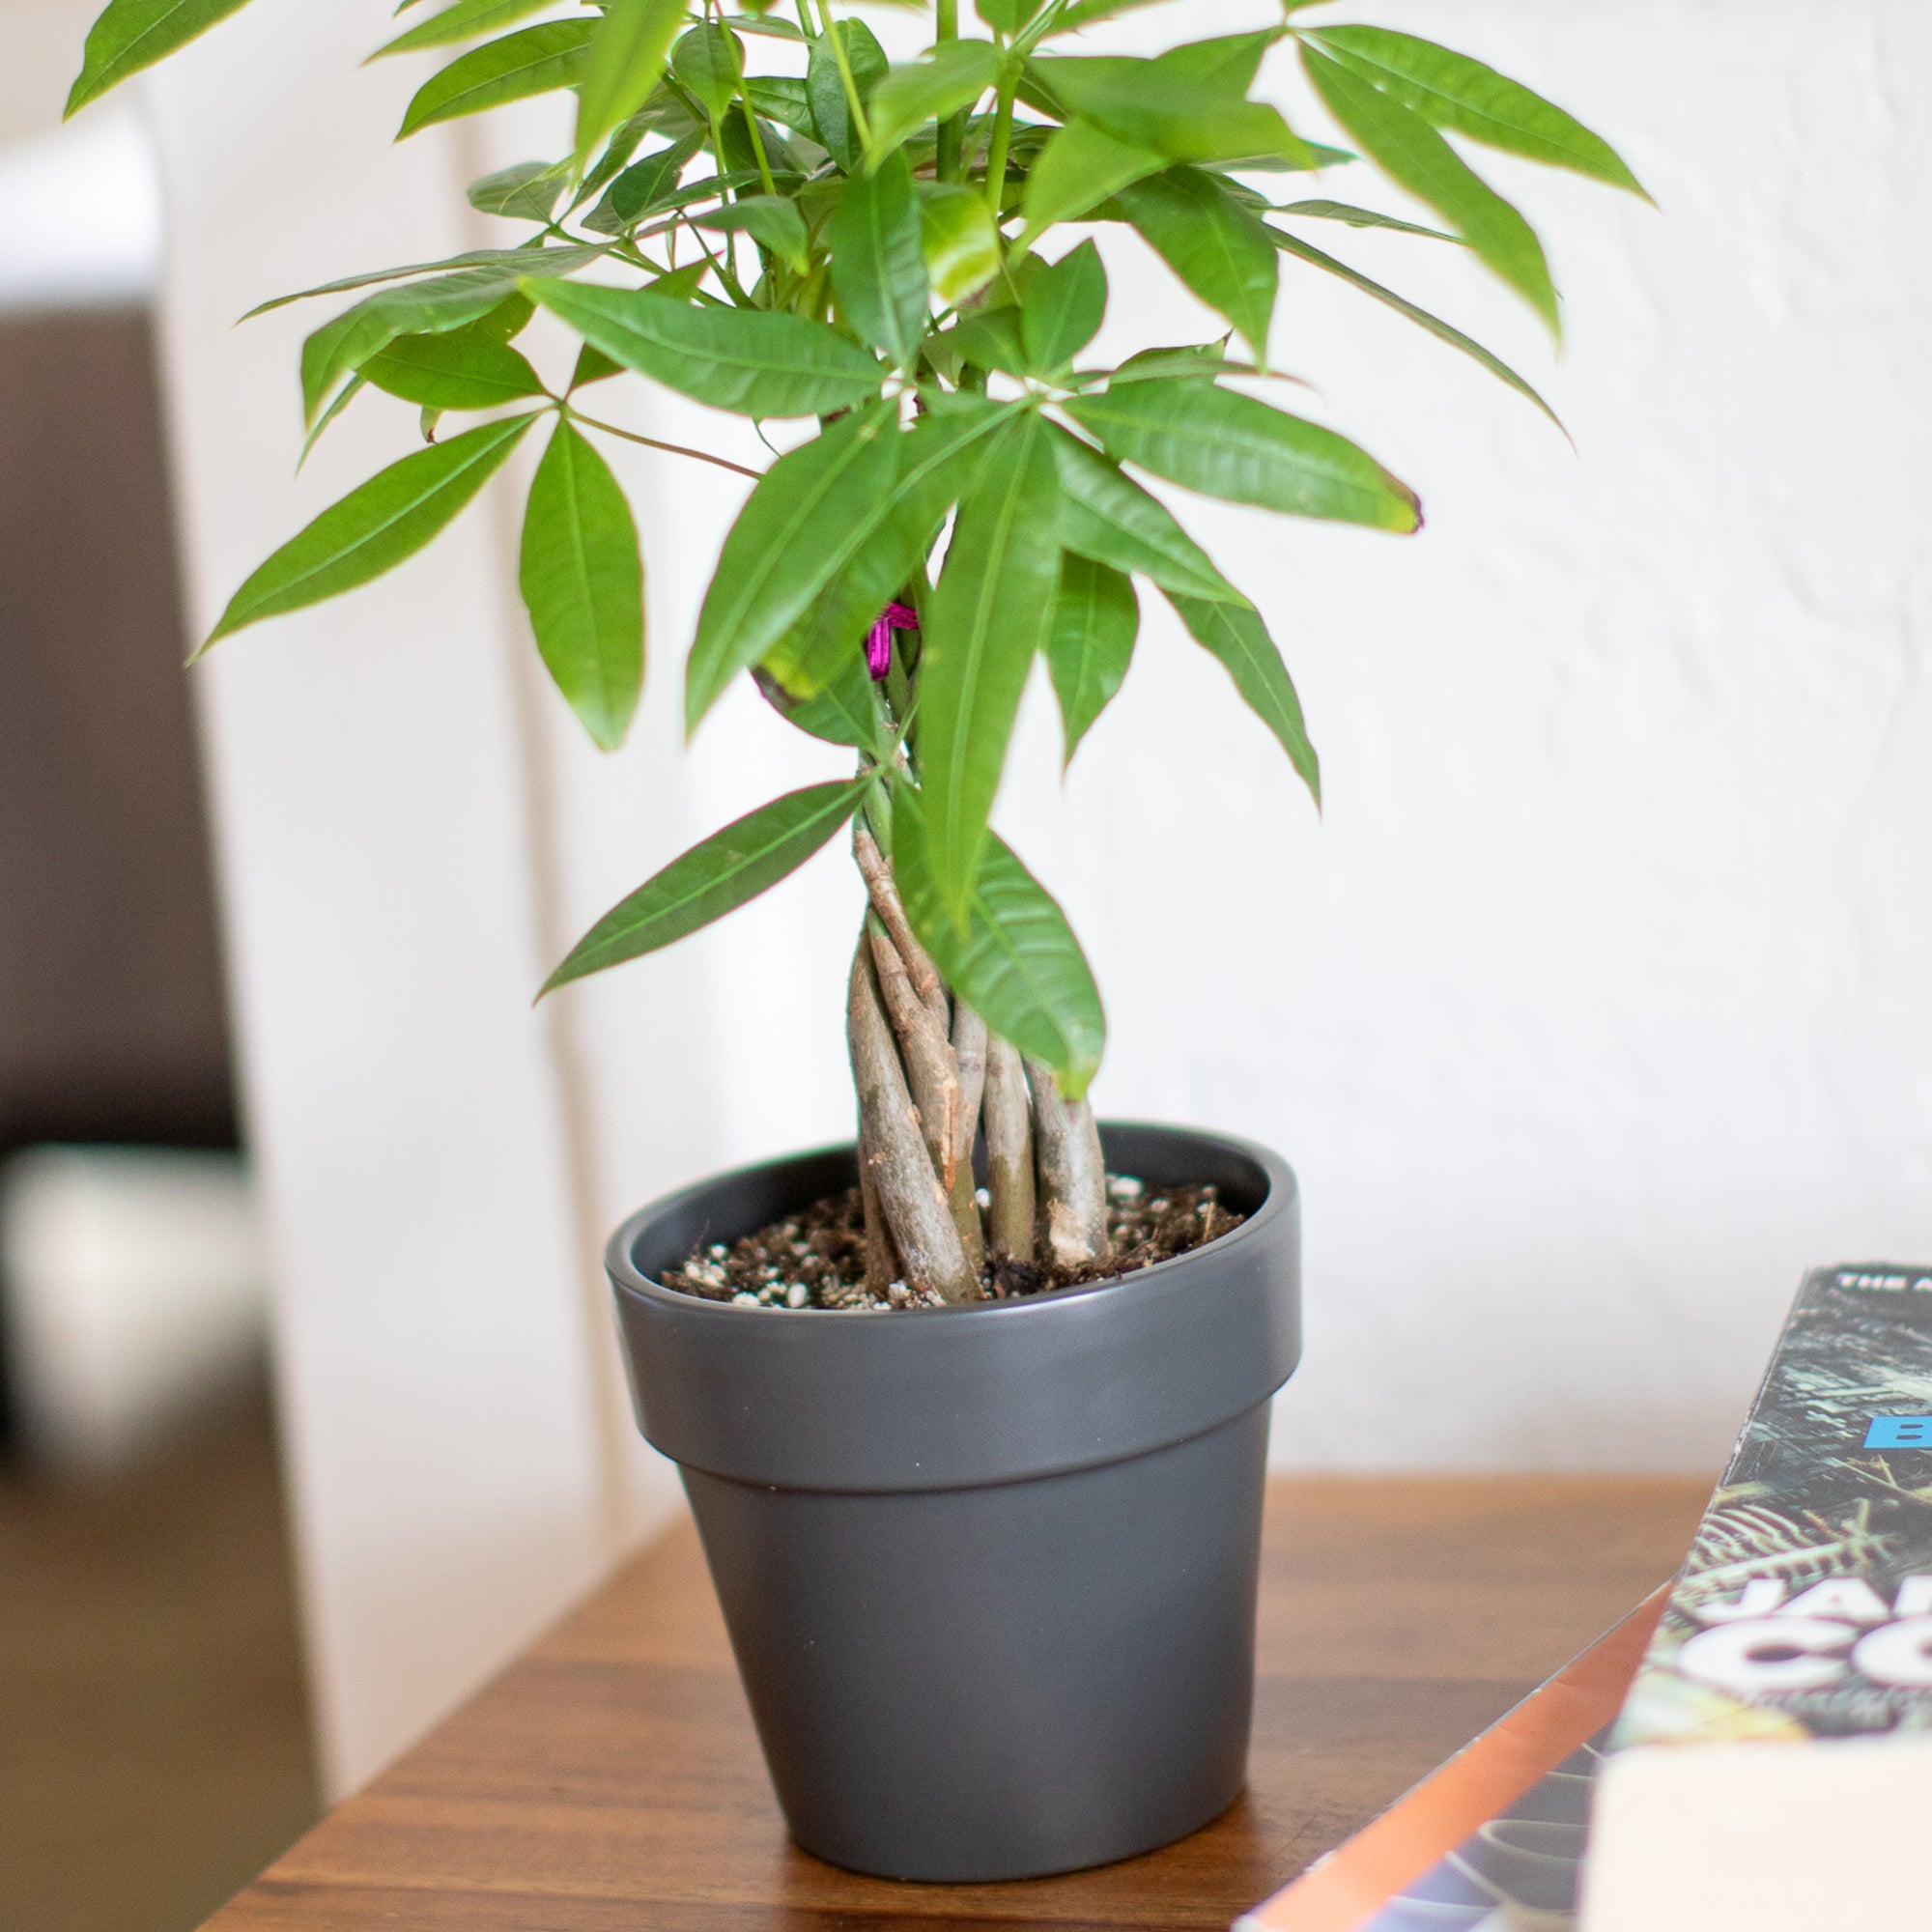 Learn How to Care For a Money Tree Plant With Our Complete Illustrated Guide